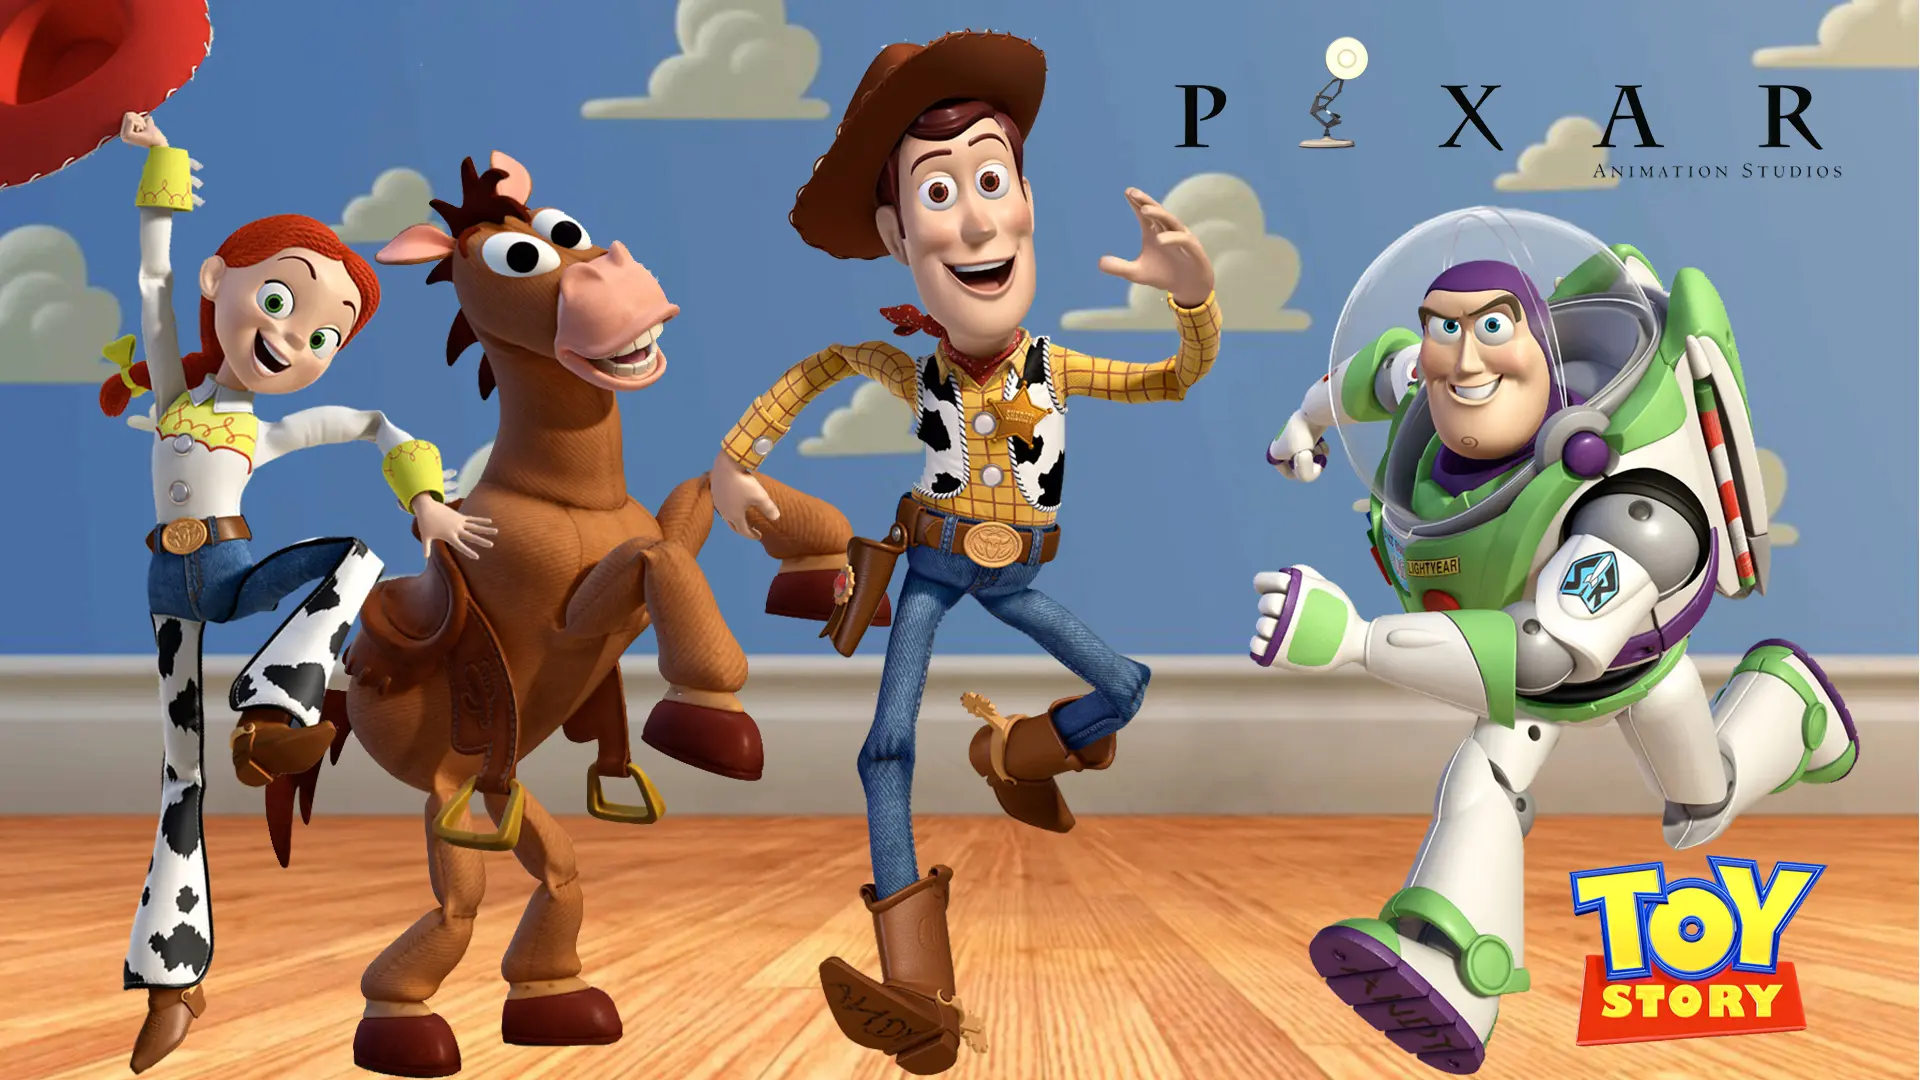 Movie Toy Story 3 wallpaper 6 | Background Image